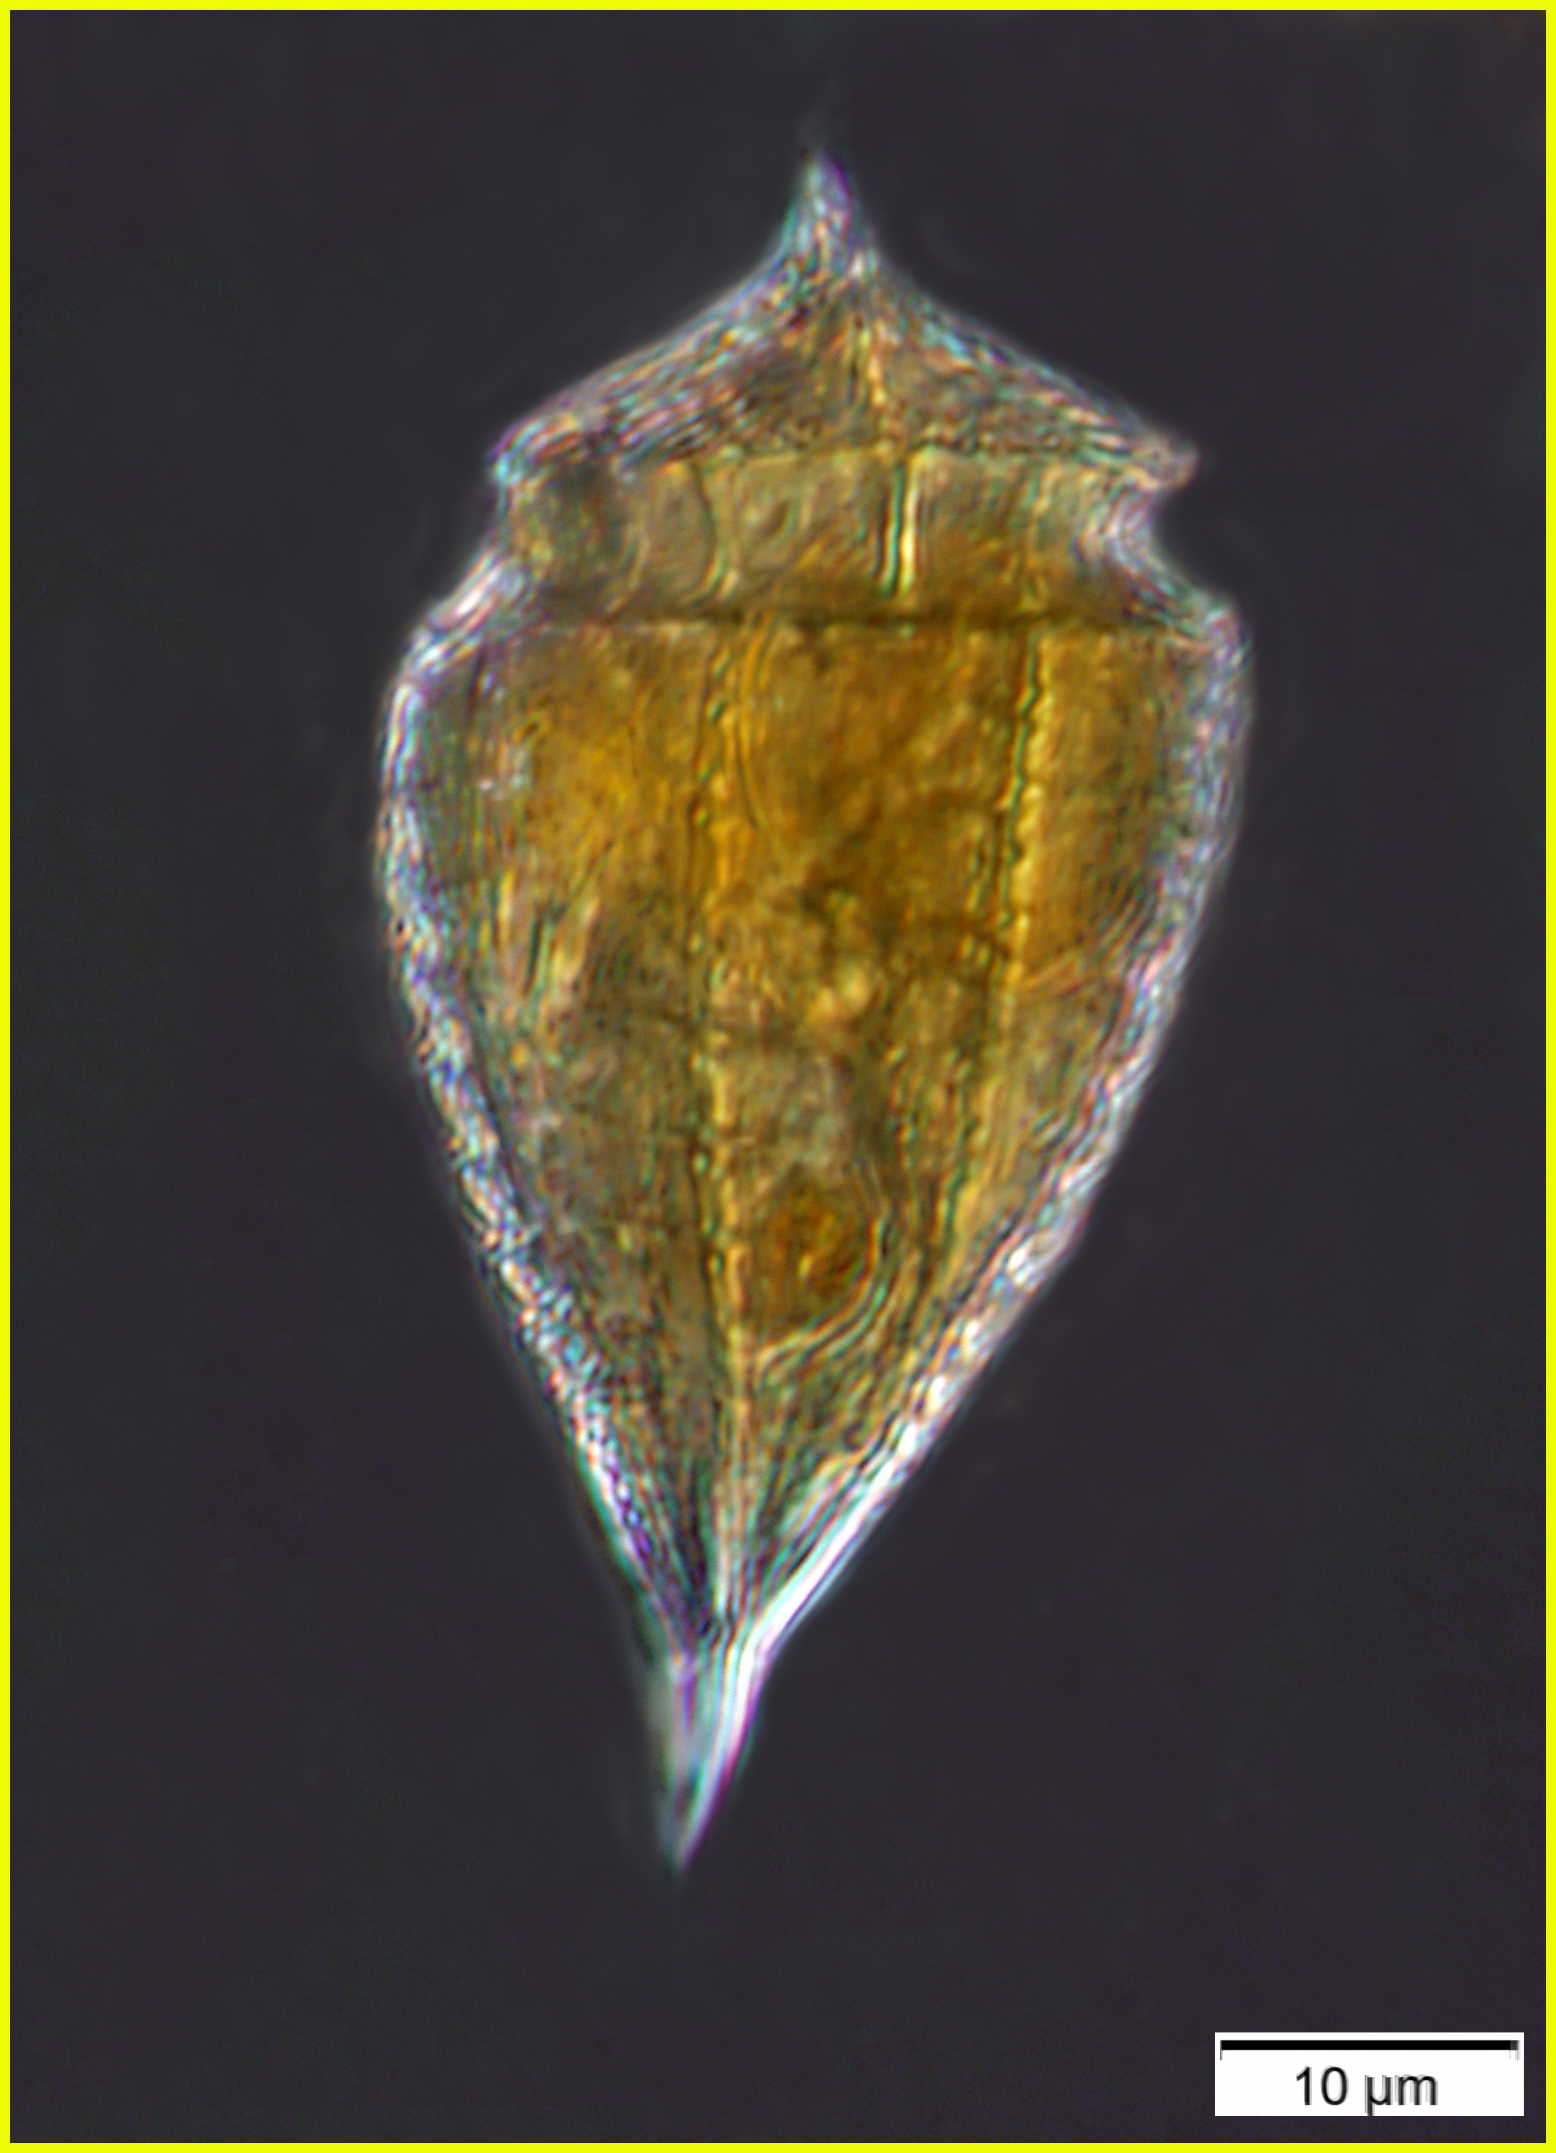 A small dinoflagellate from Station 64